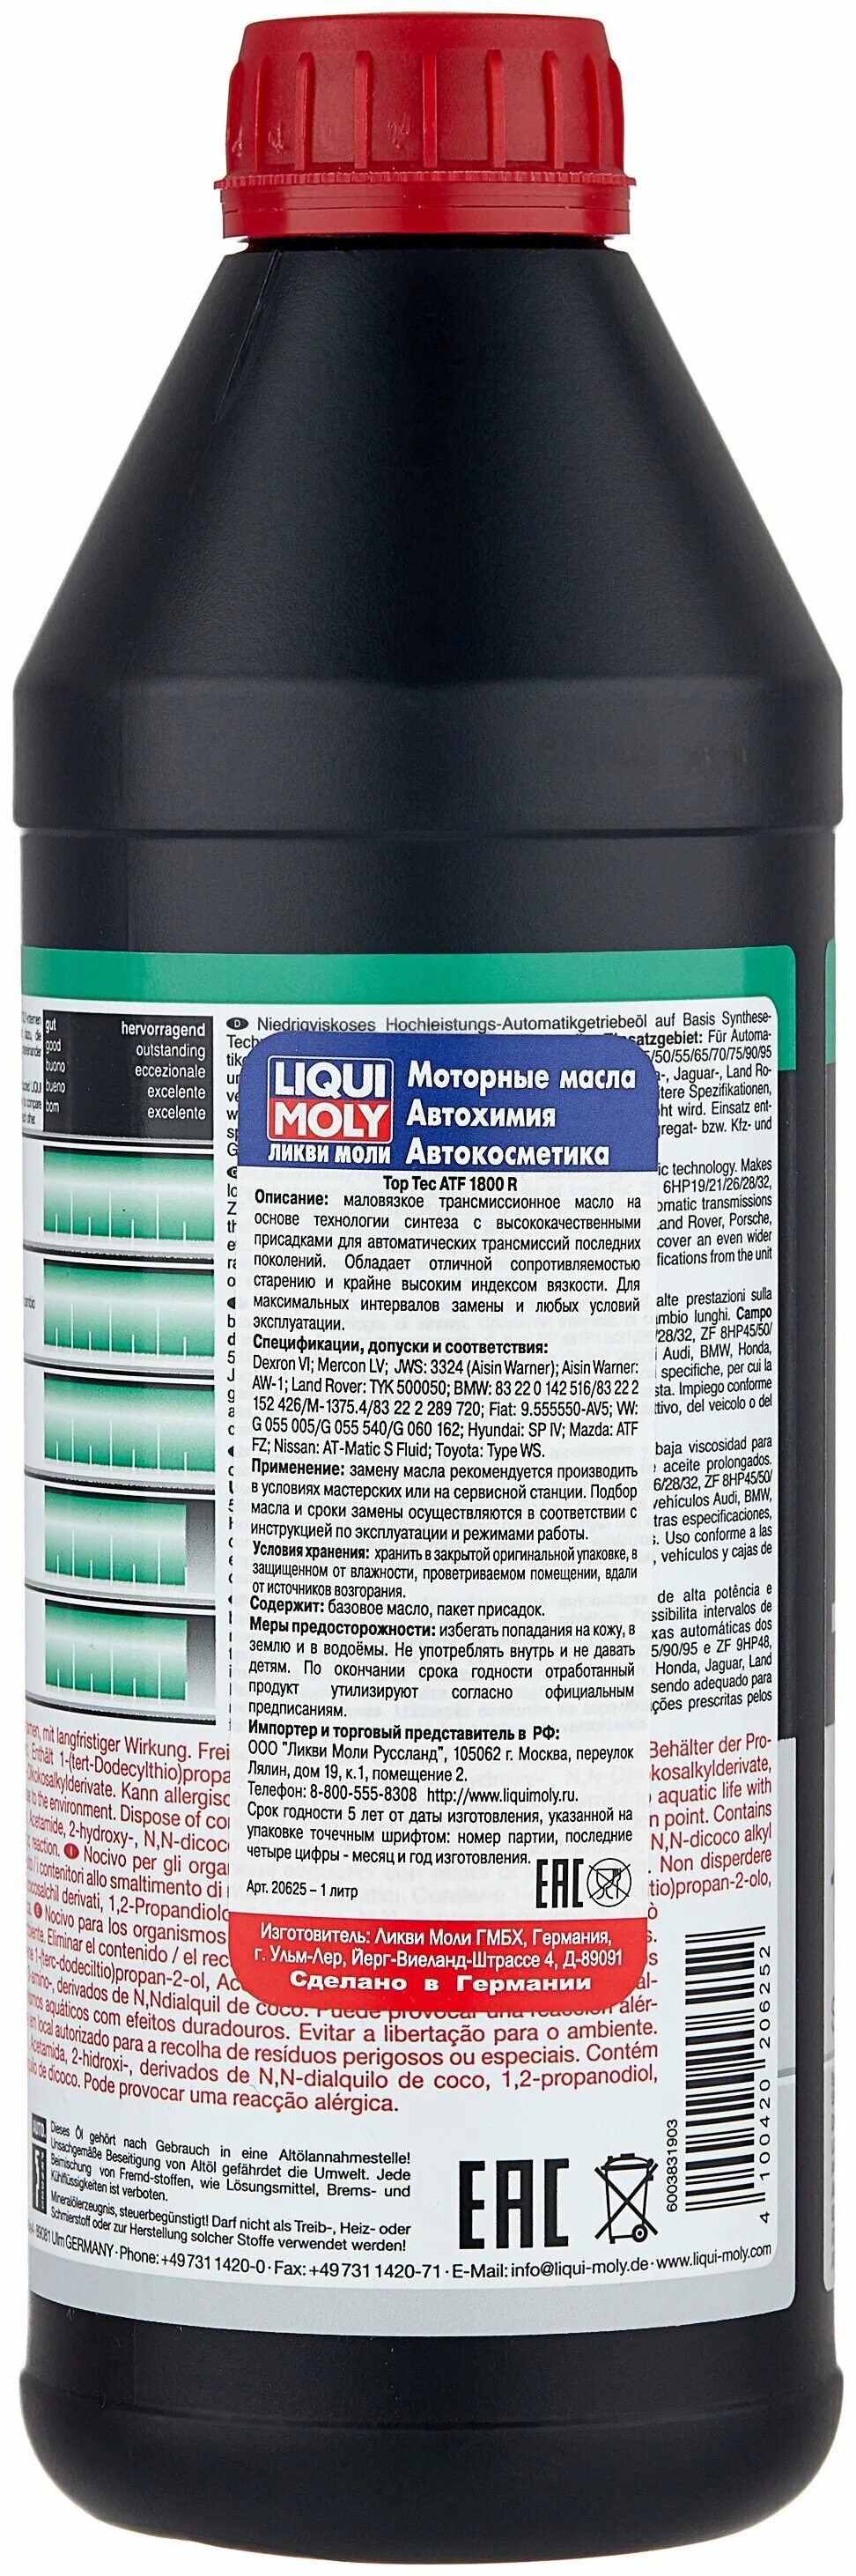 Liqui moly top tec 1800. Liqui Moly Top Tec ATF 1800. ATF 1800 Liqui Moly. Масло Top Tec ATF 1800. Трансмиссионное масло Liqui Moly ATF 1800 Toptek.